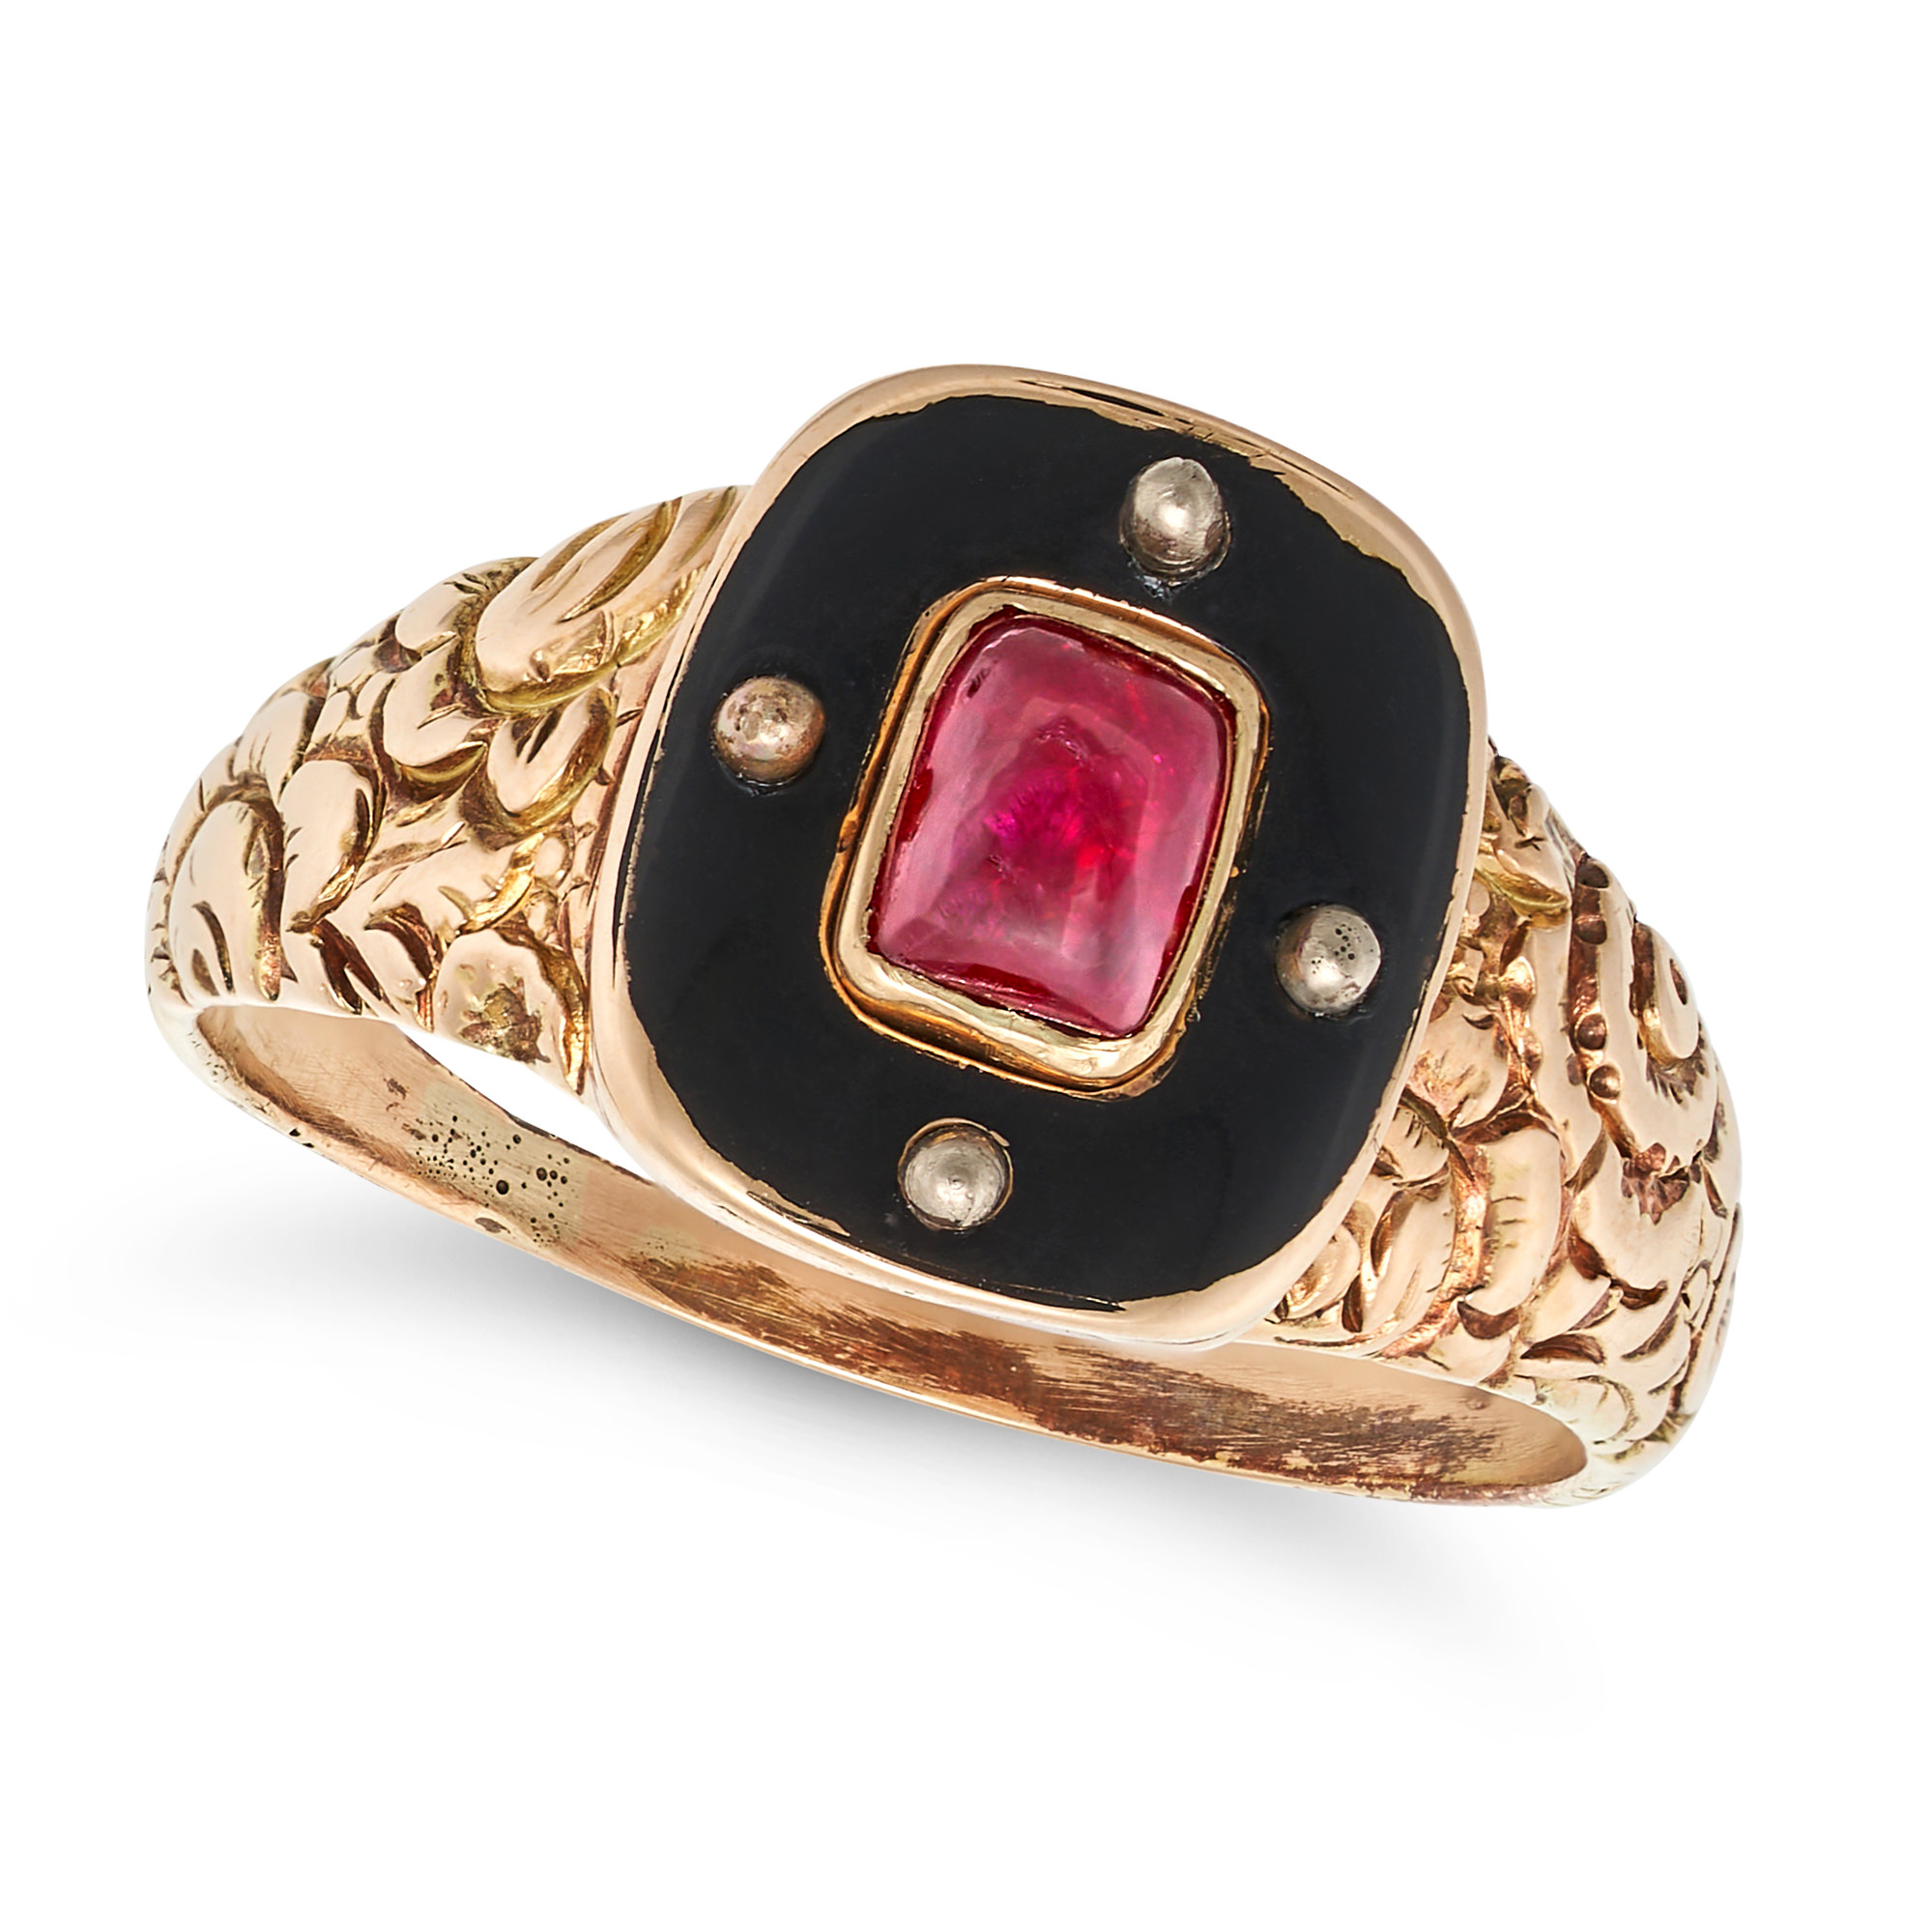 AN ANTIQUE GEORGIAN RUBY AND ENAMEL MOURNING RING in yellow gold, set with a cabochon cut ruby in...